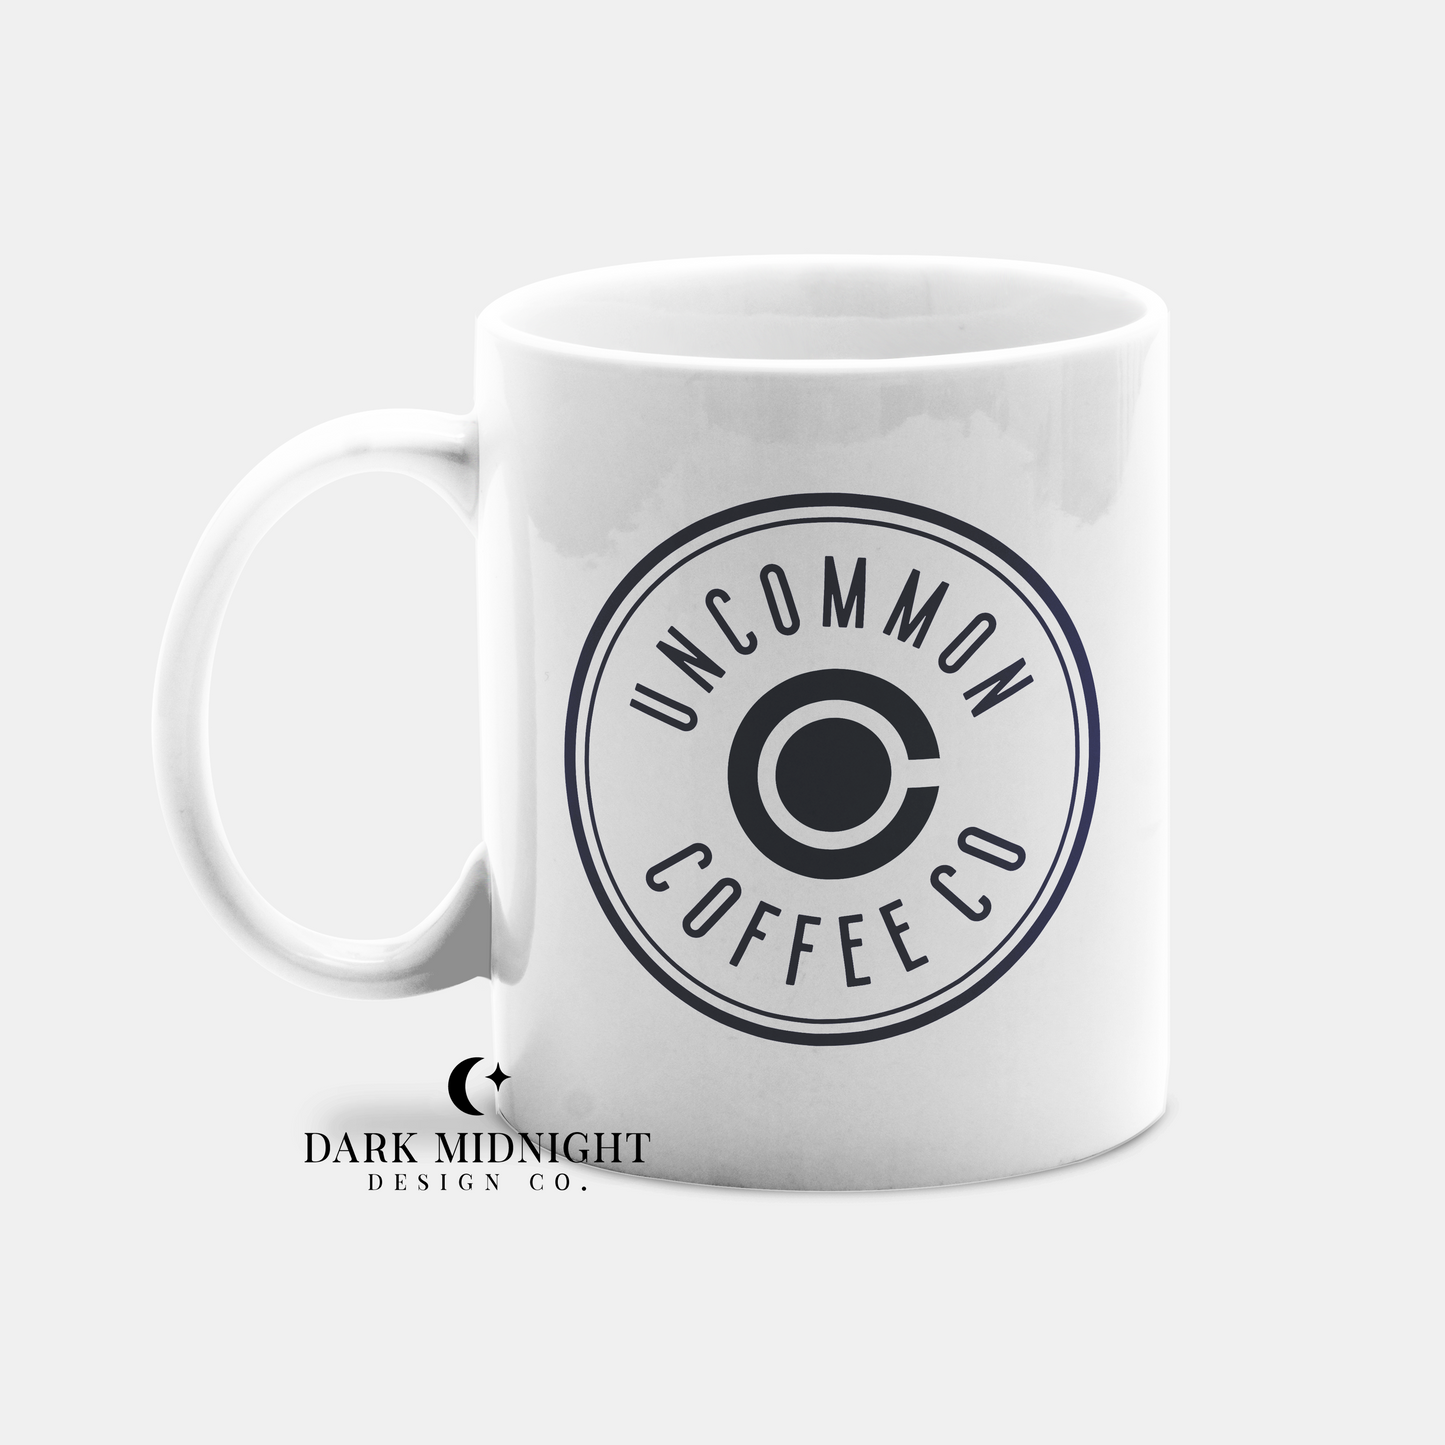 Uncommon Coffee Co 15oz Coffee Mug - Officially Licensed Rules of the Game Series